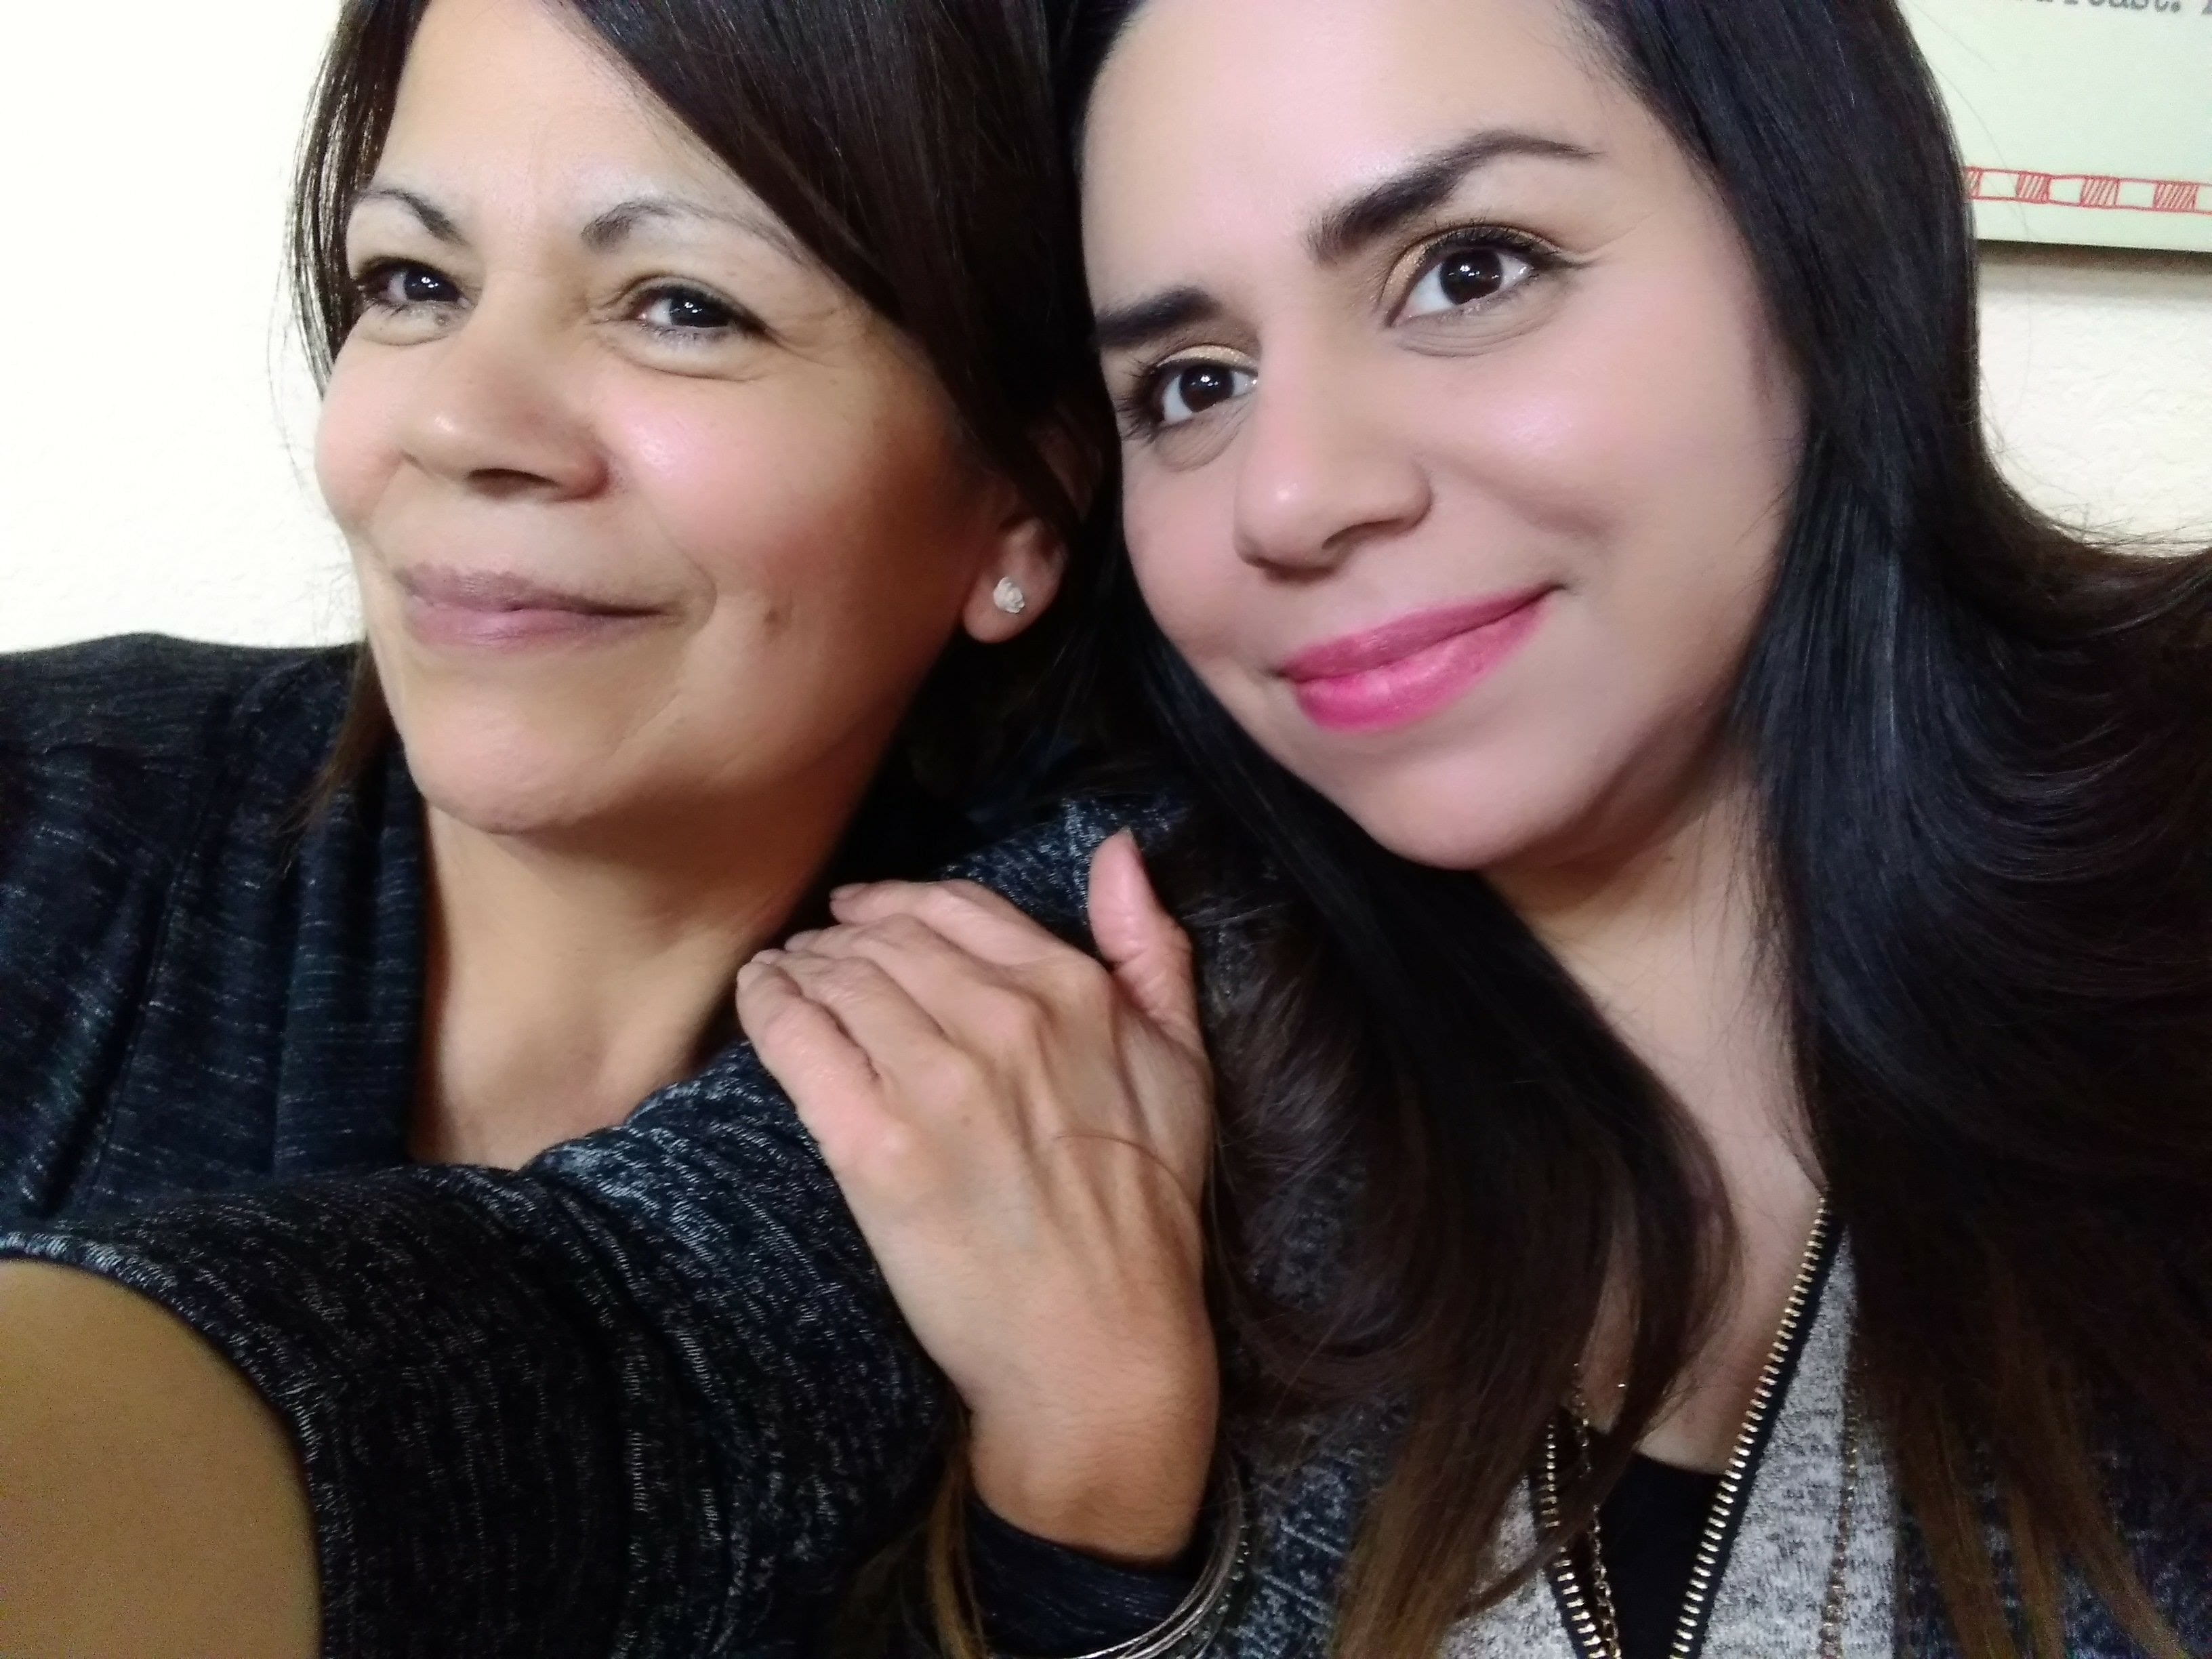 Maria Juarez (right) with her mother Maria Puente (left)